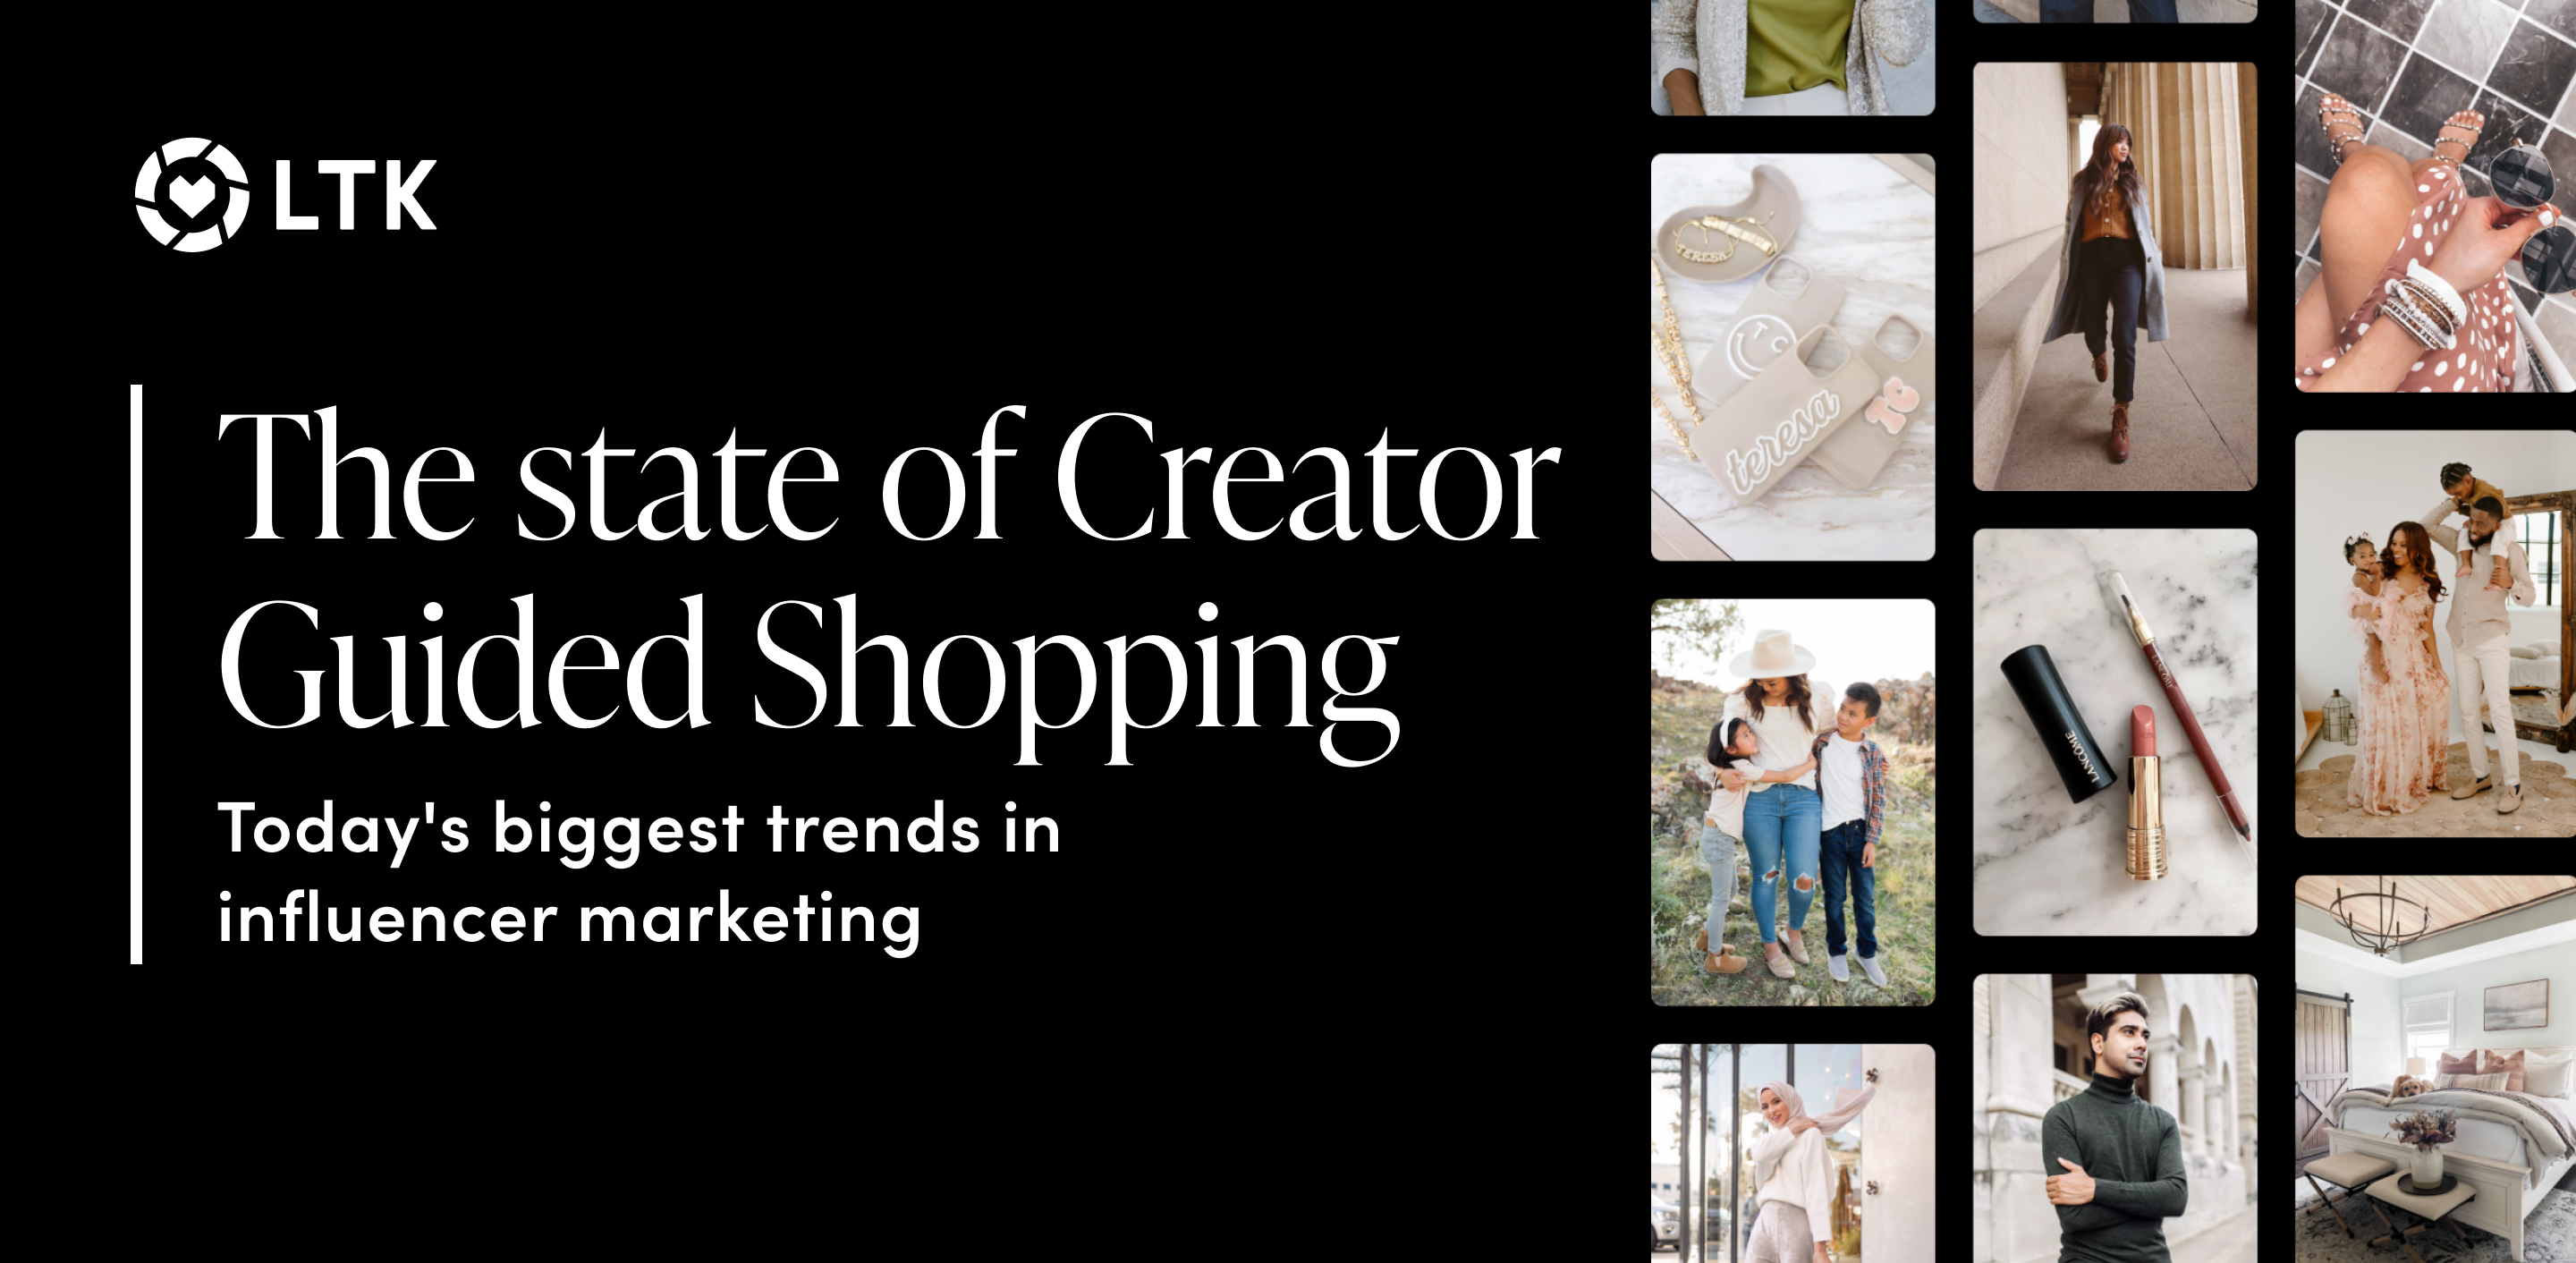 https://onbrand.shopltk.com/hubfs/State-of-Creator-Guided-Shopping%20%281%29.png